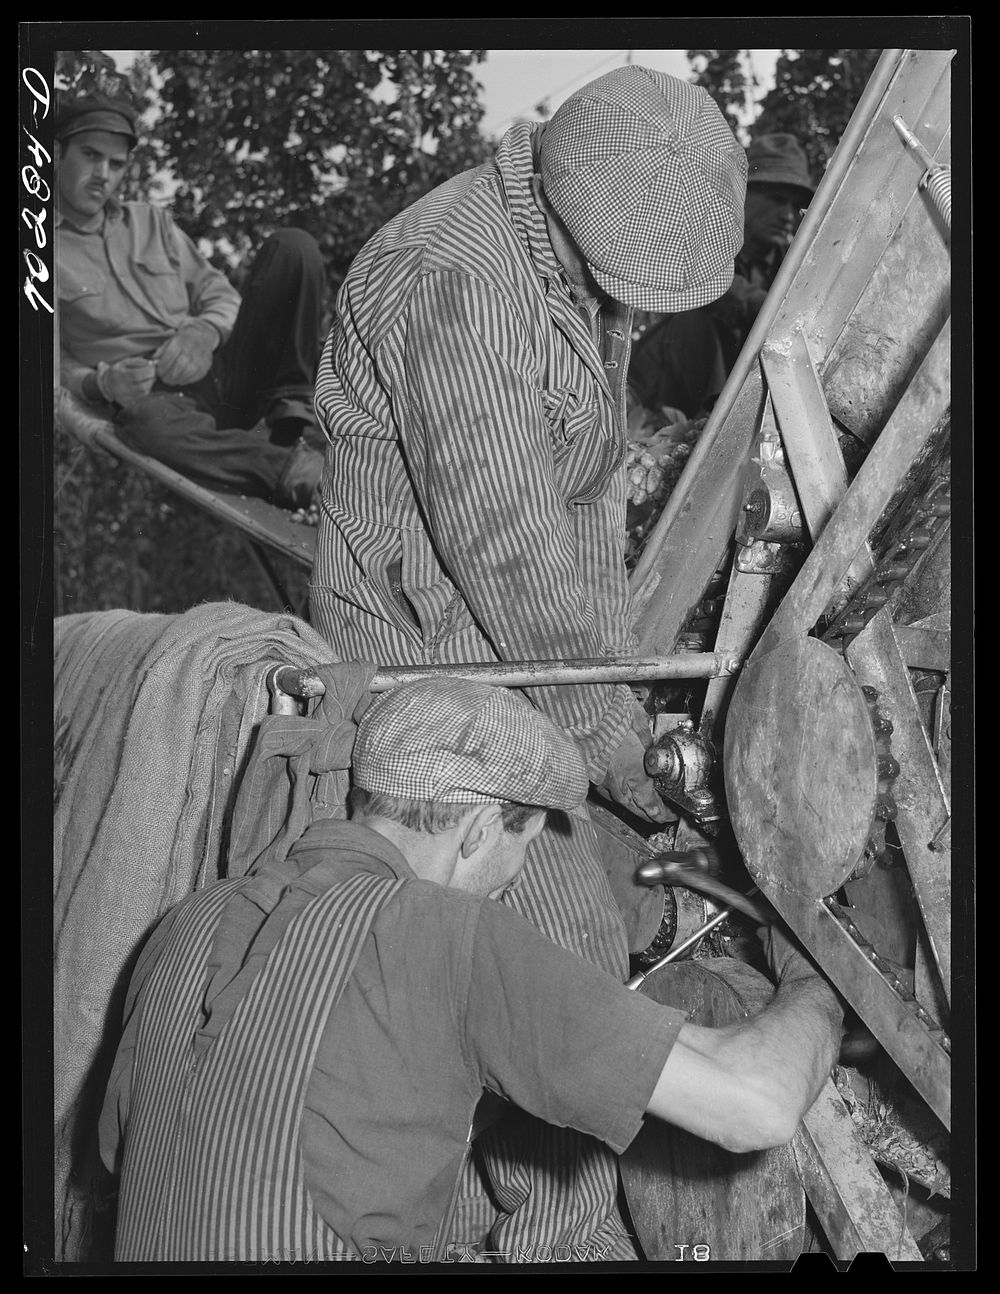 [Untitled photo, possibly related to: Portable-type mechanical hop picker. Yakima Chief Hop Ranch, Yakima County…